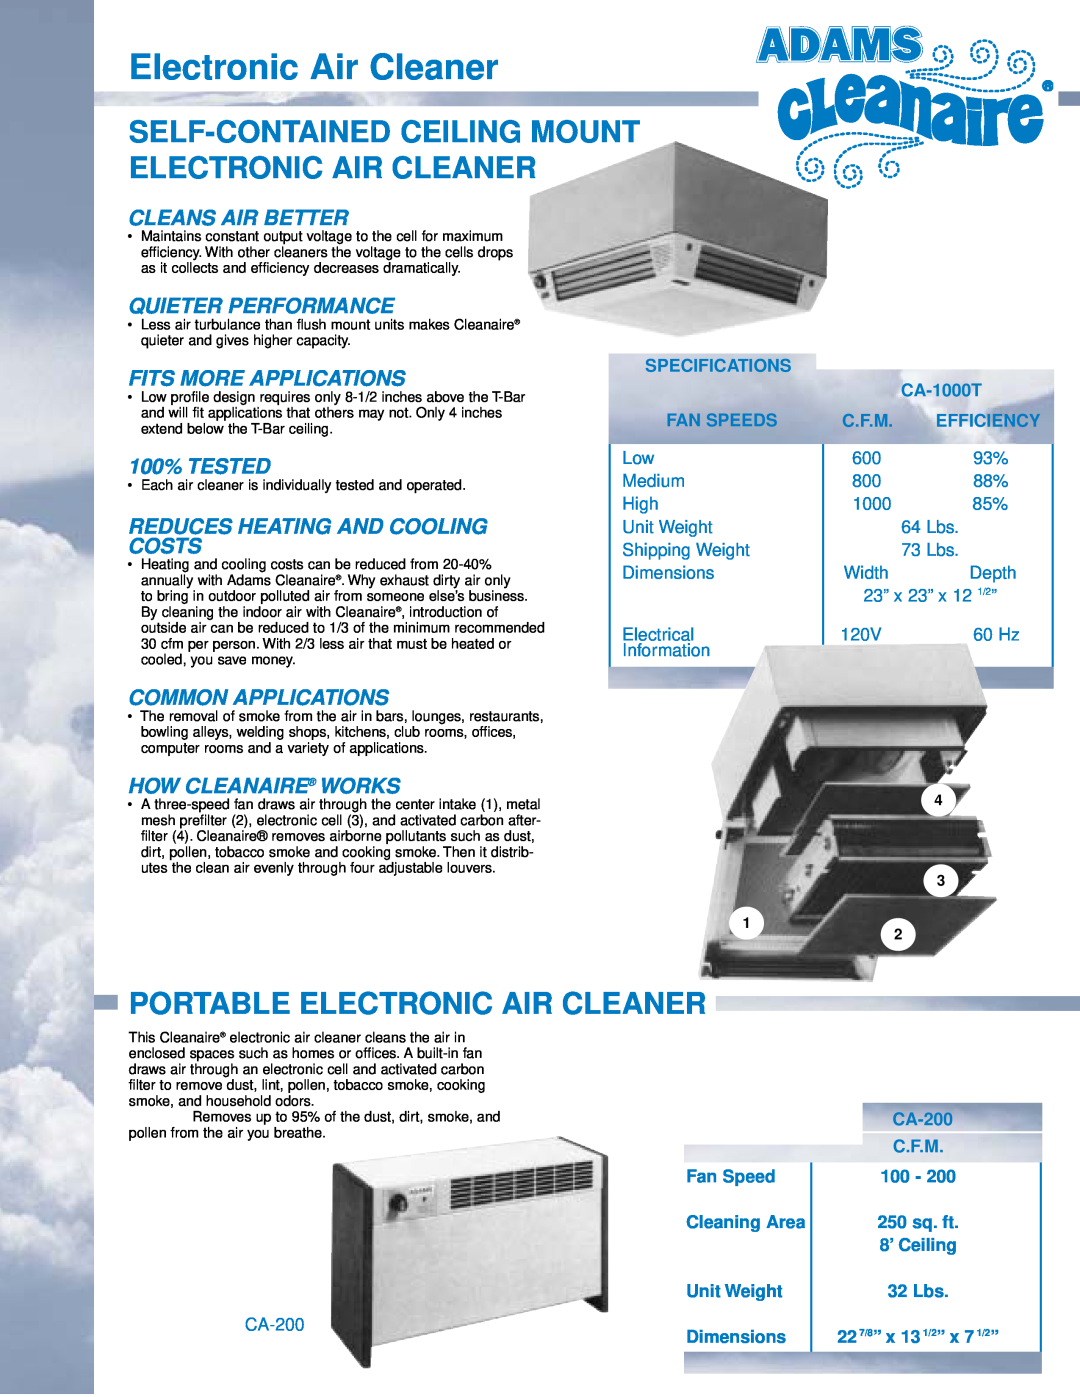 Adams Cleanaire Portable Electronic Air Cleaner, Cleans Air Better, Quieter Performance, Fits More Applications, CA-1000T 